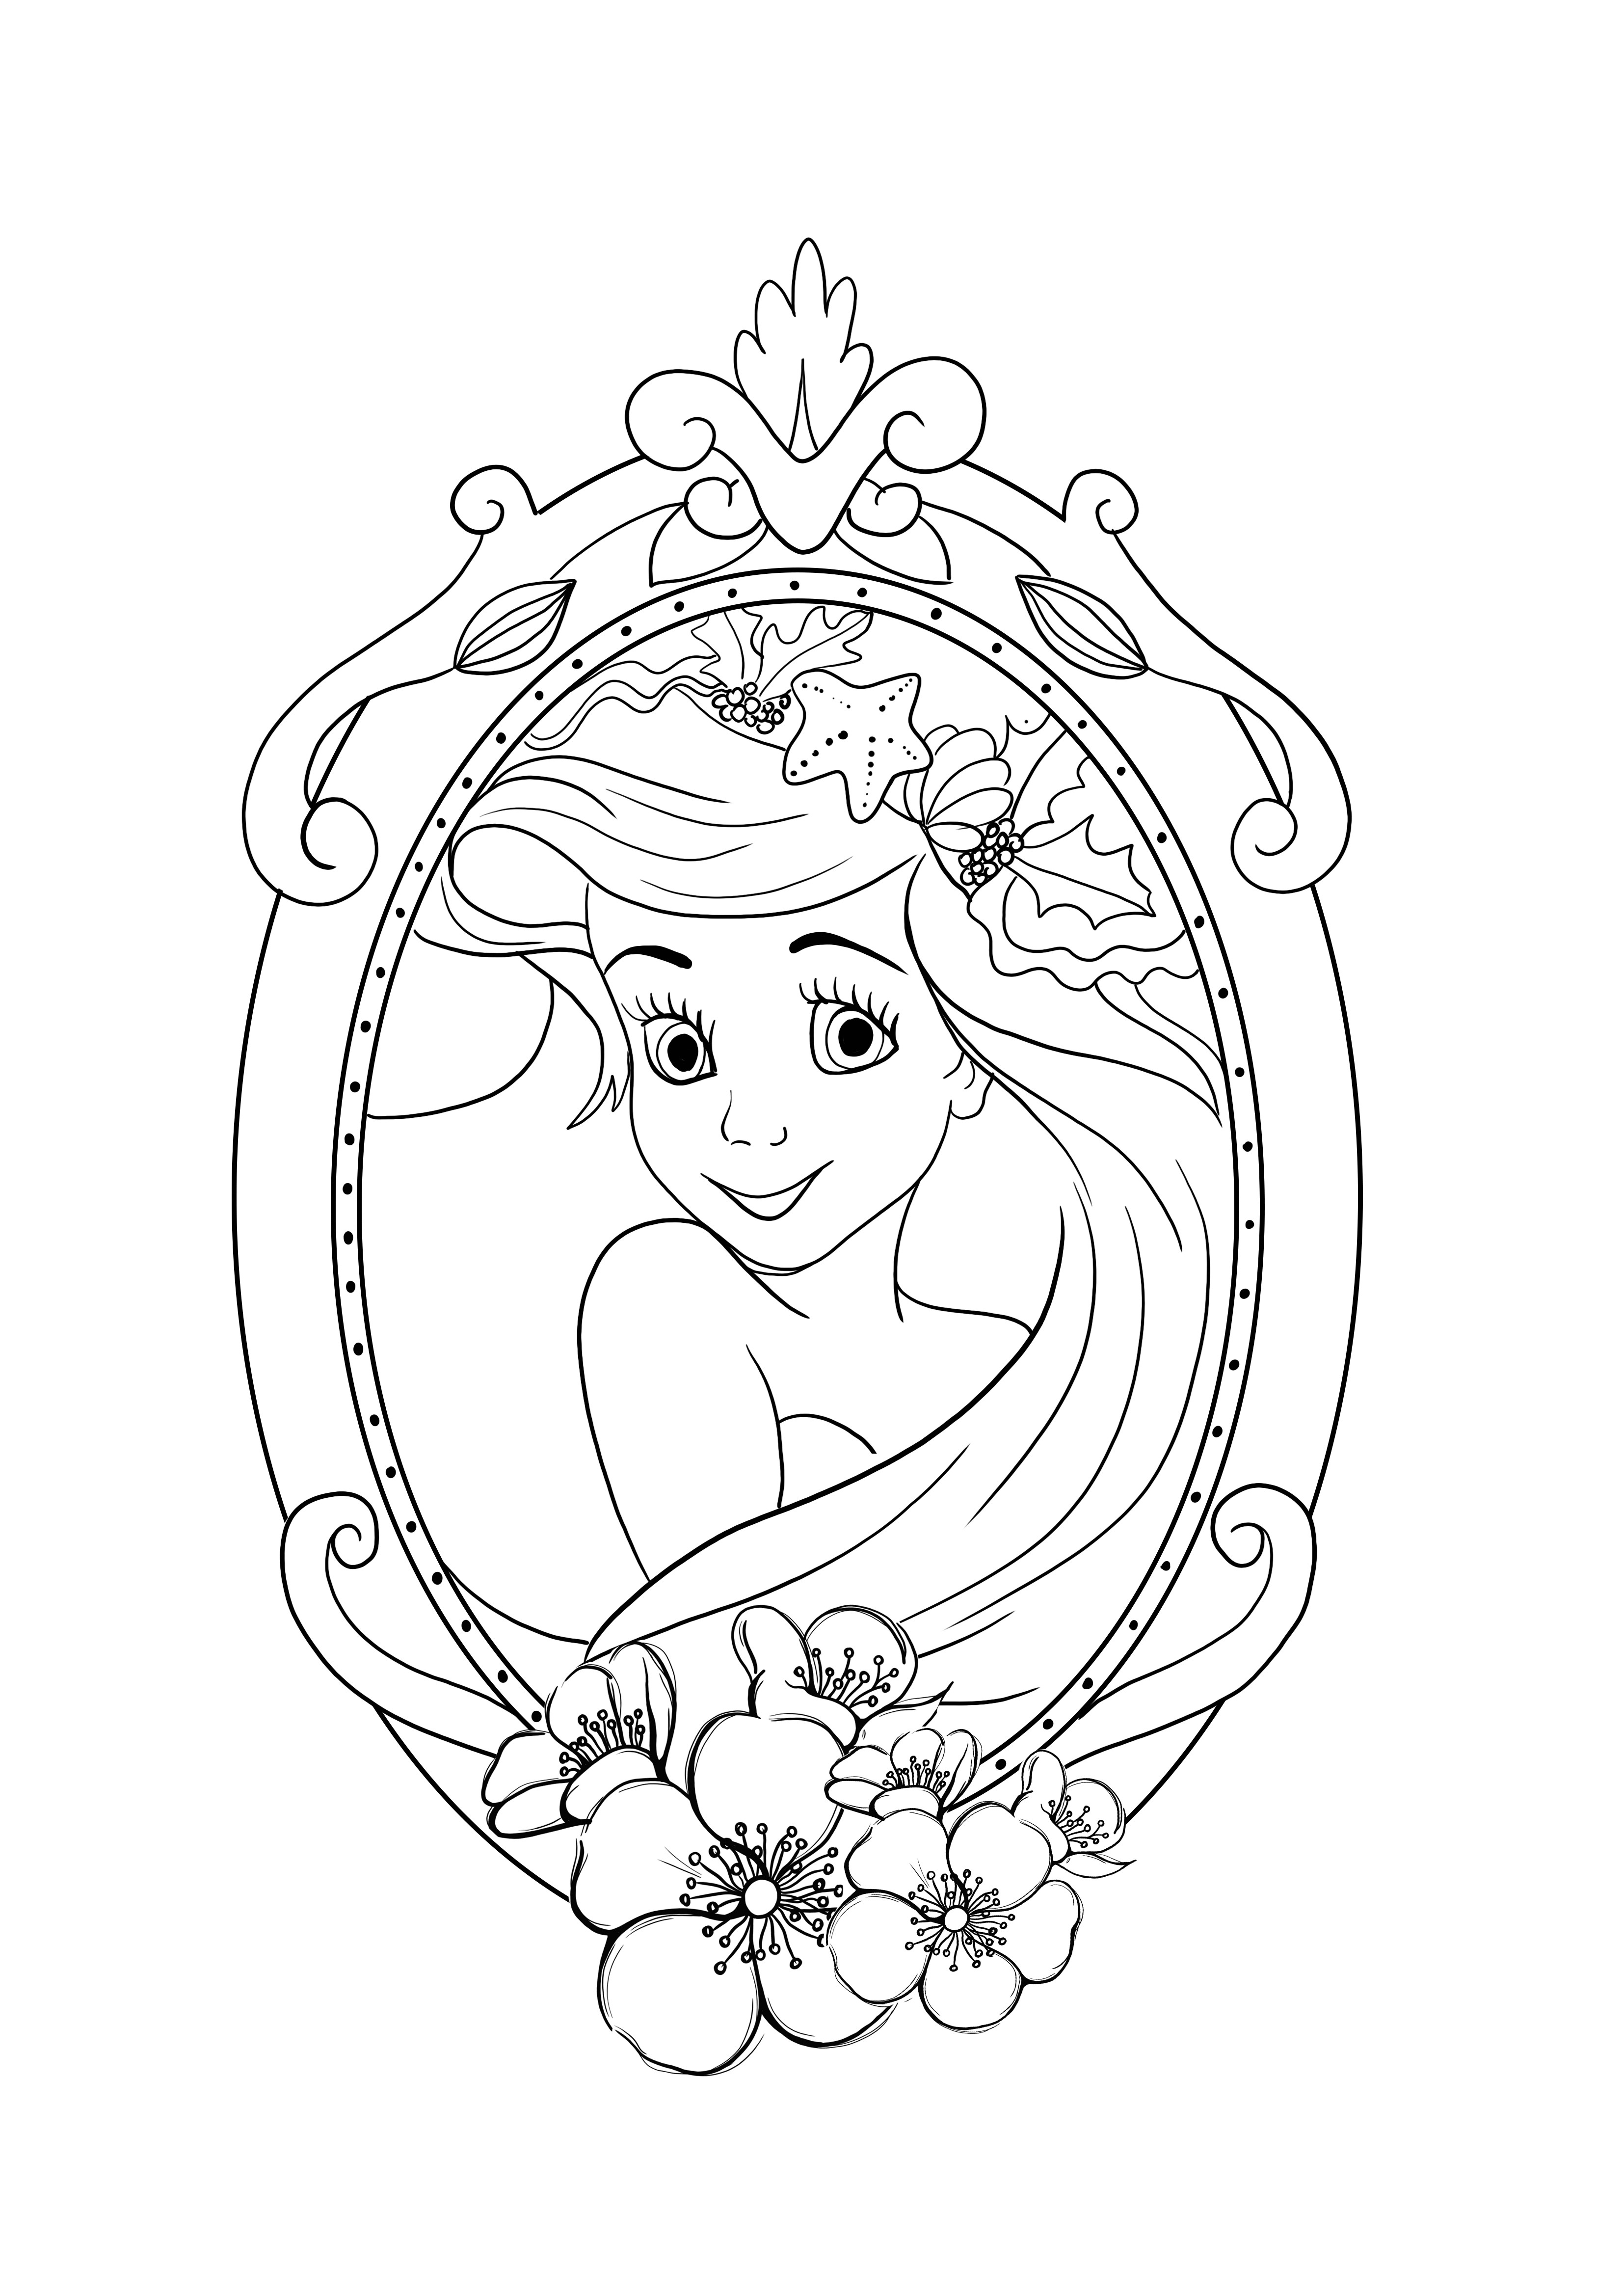 Ariel Coloring Pages Best Coloring Pages For Kids - Otakugadgets